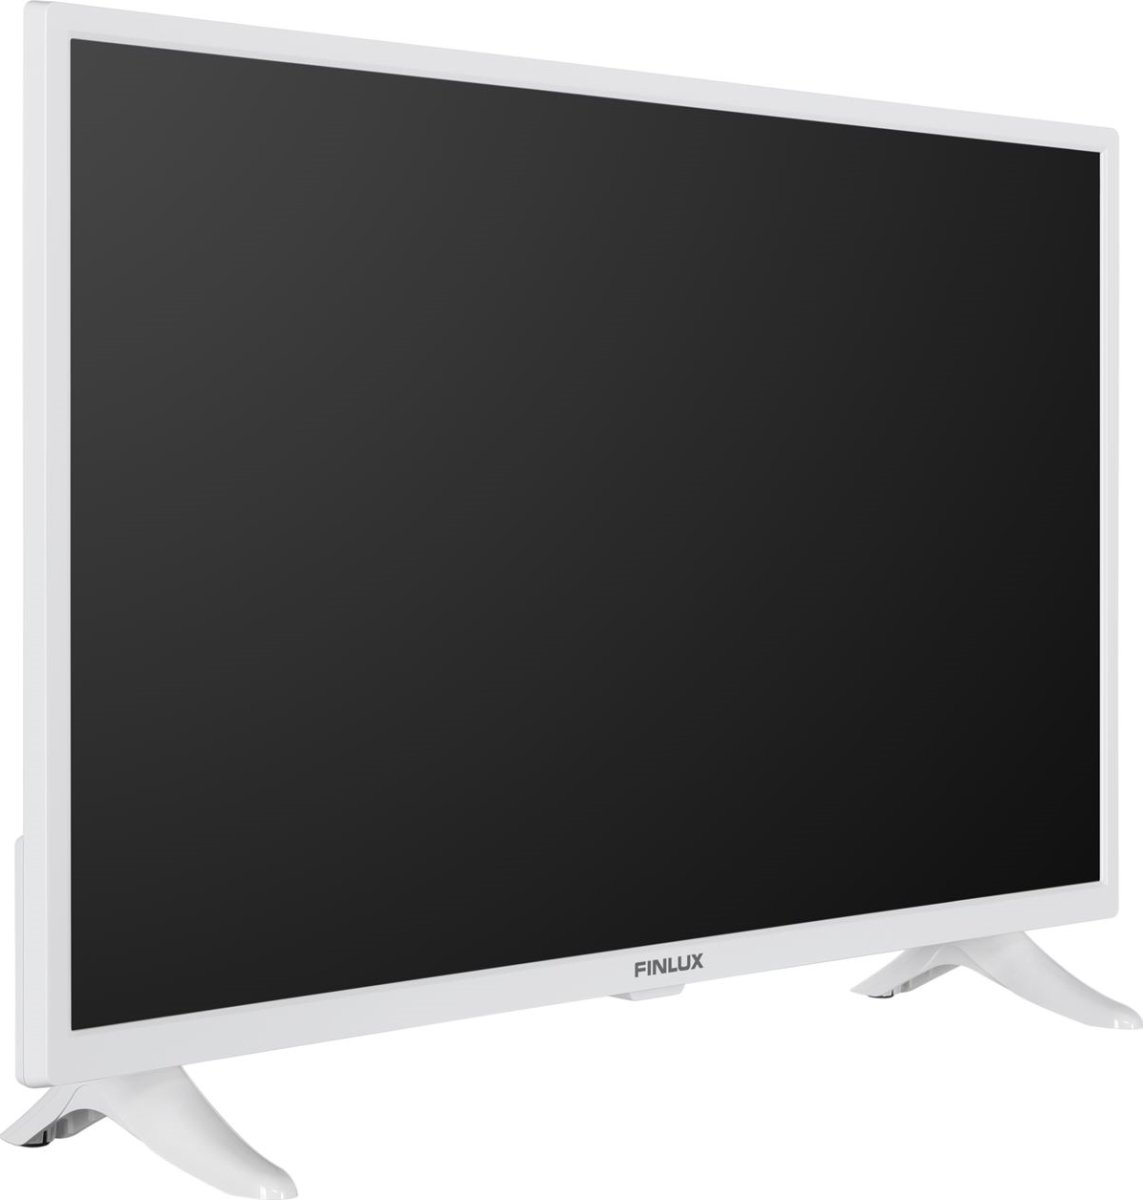 Finlux 32” HD Android TV